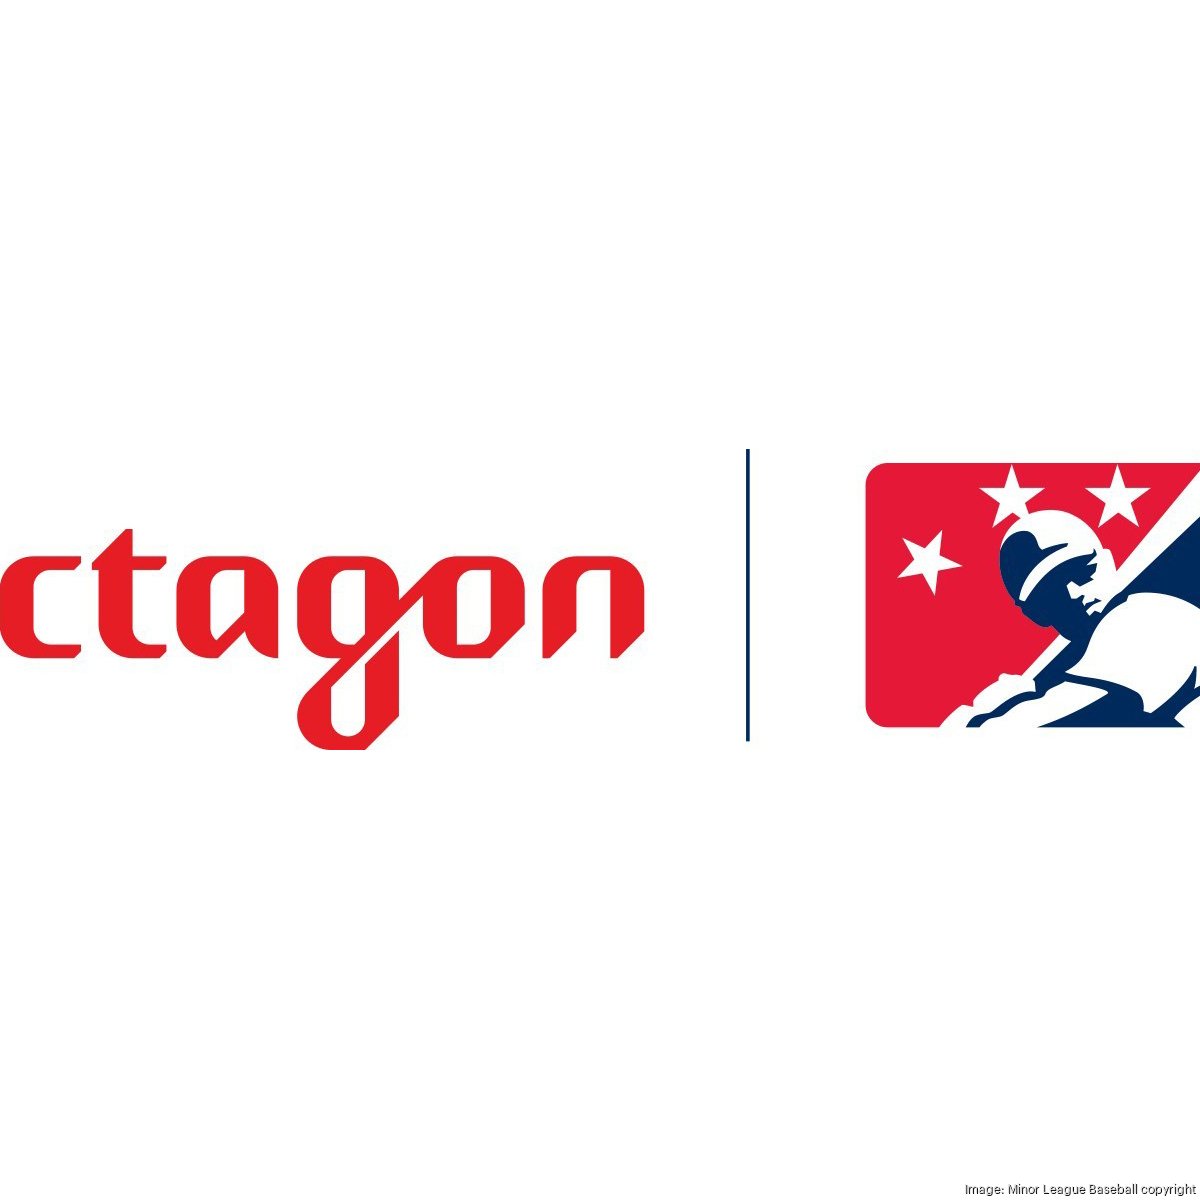 Octagon hired to sell media rights for Minor League Baseball